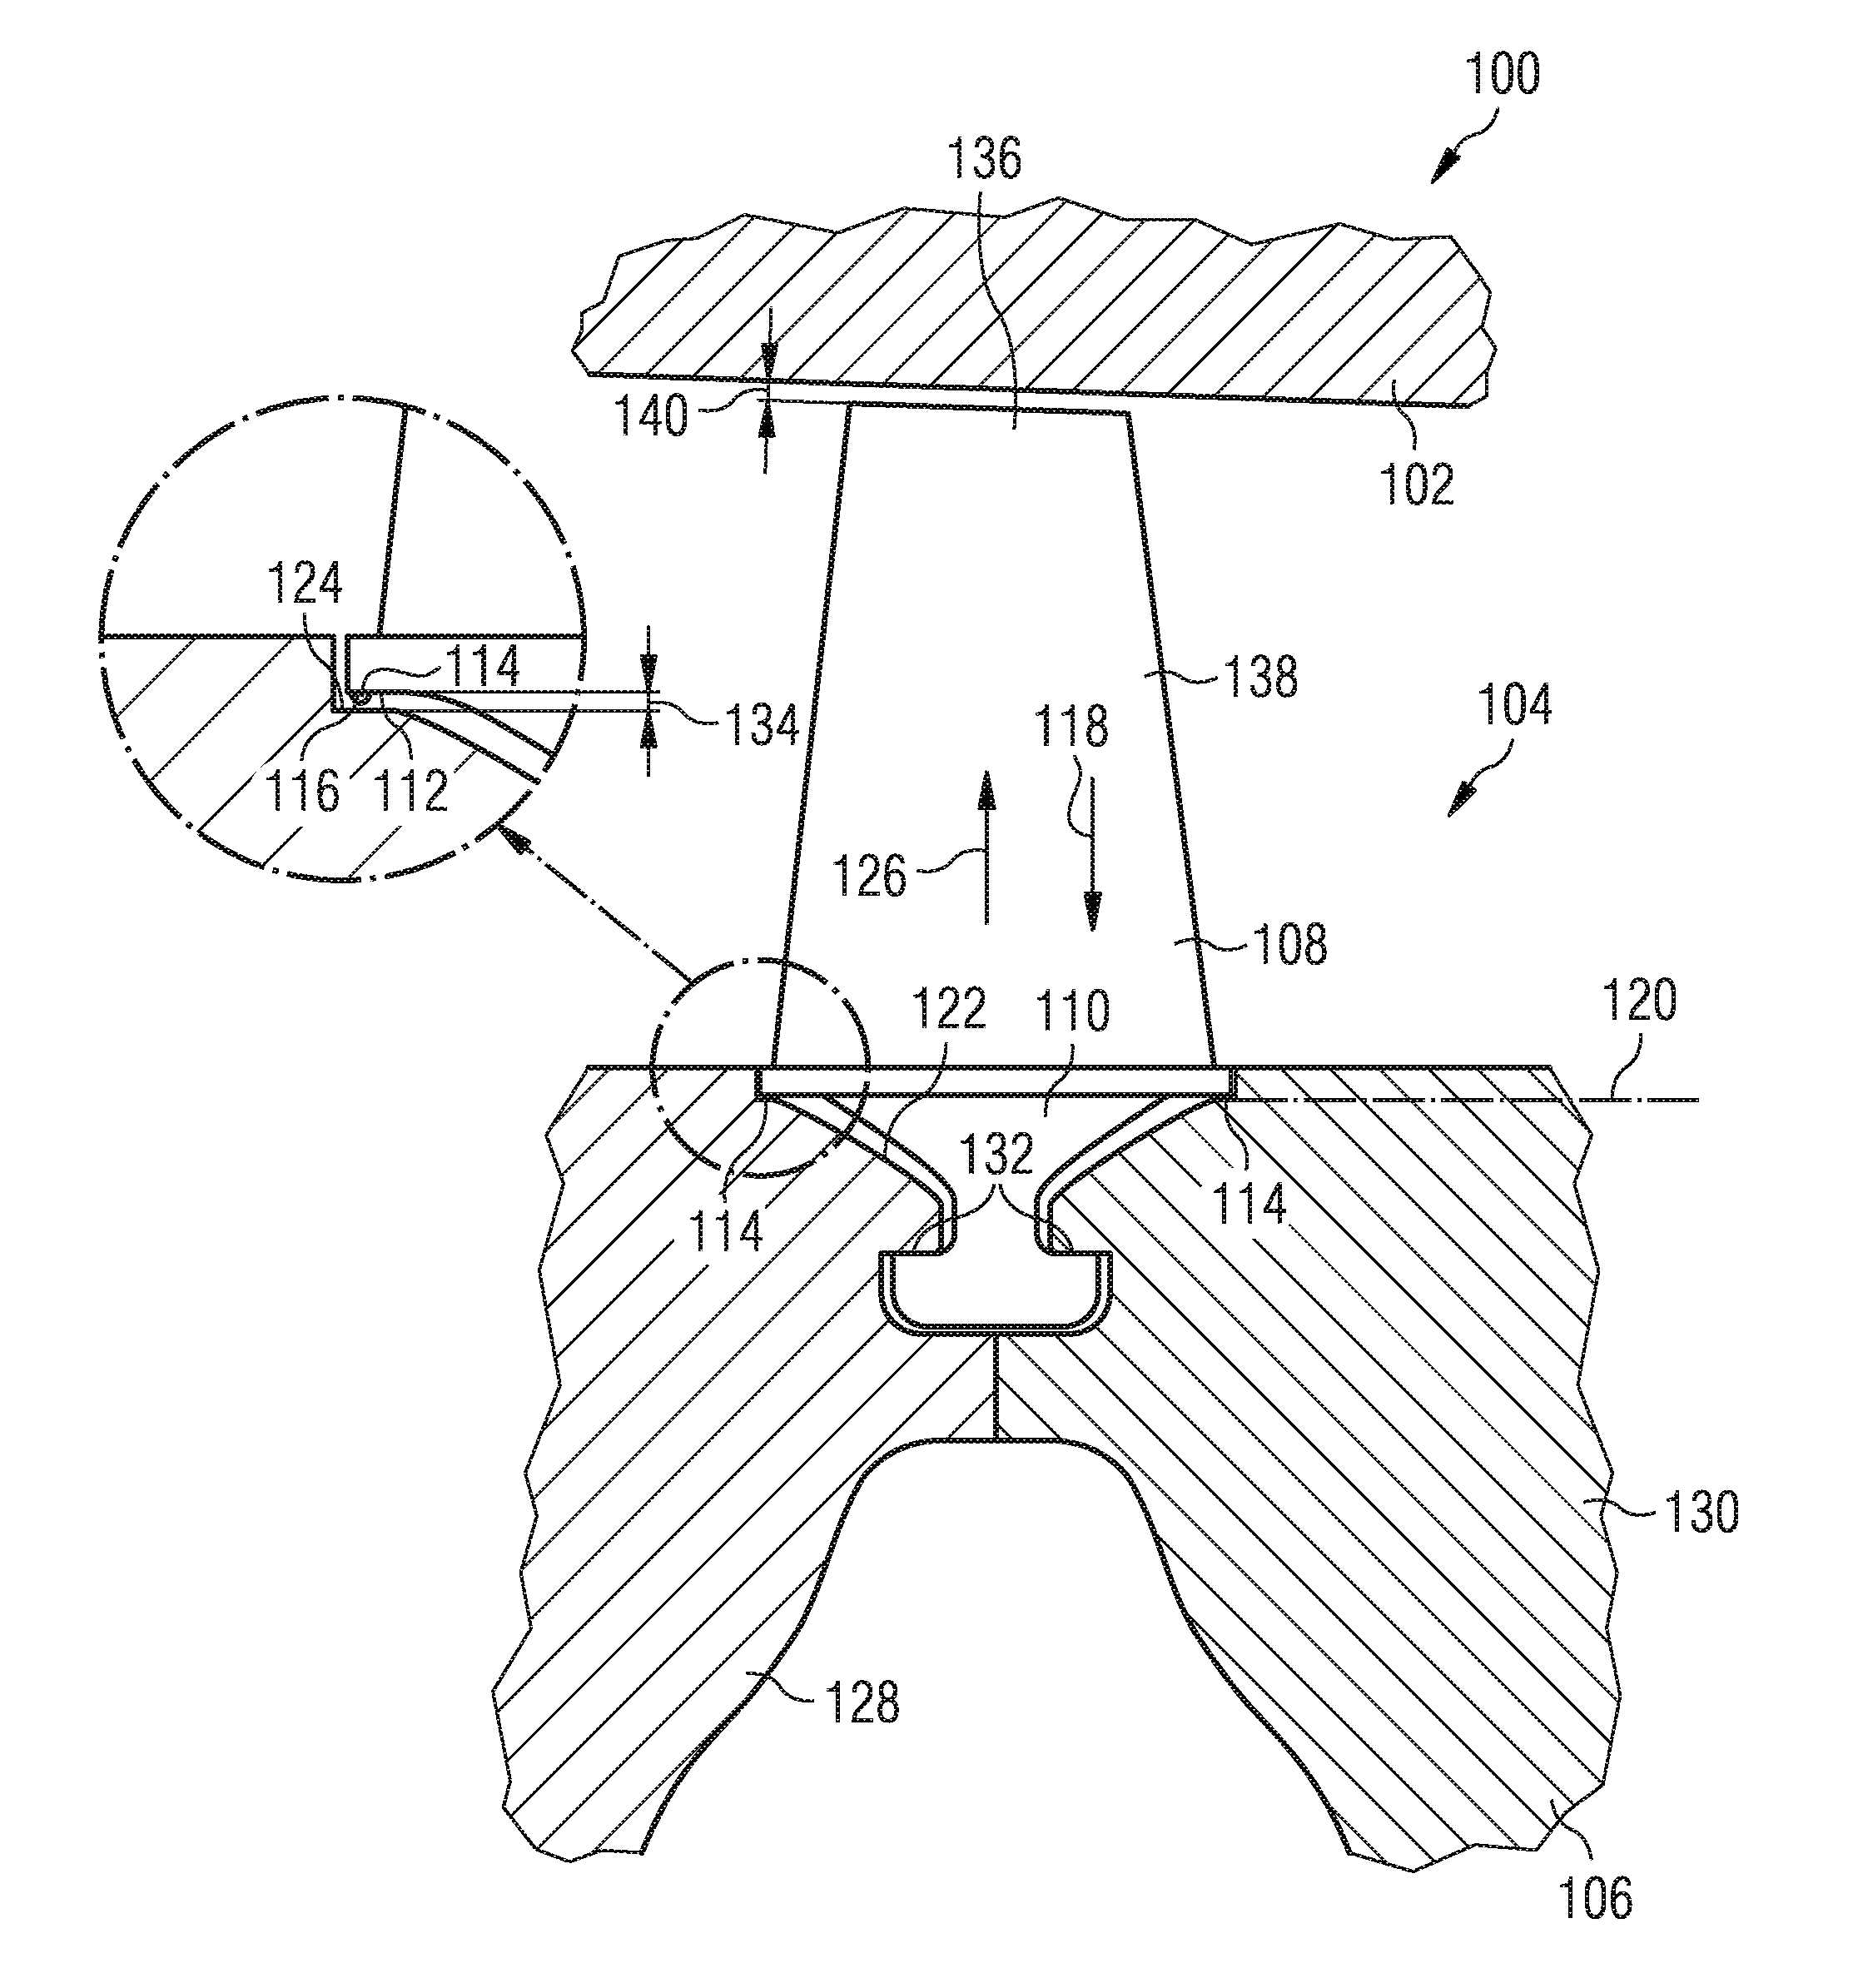 Turbomachine rotor with blade roots with adjusting protrusions